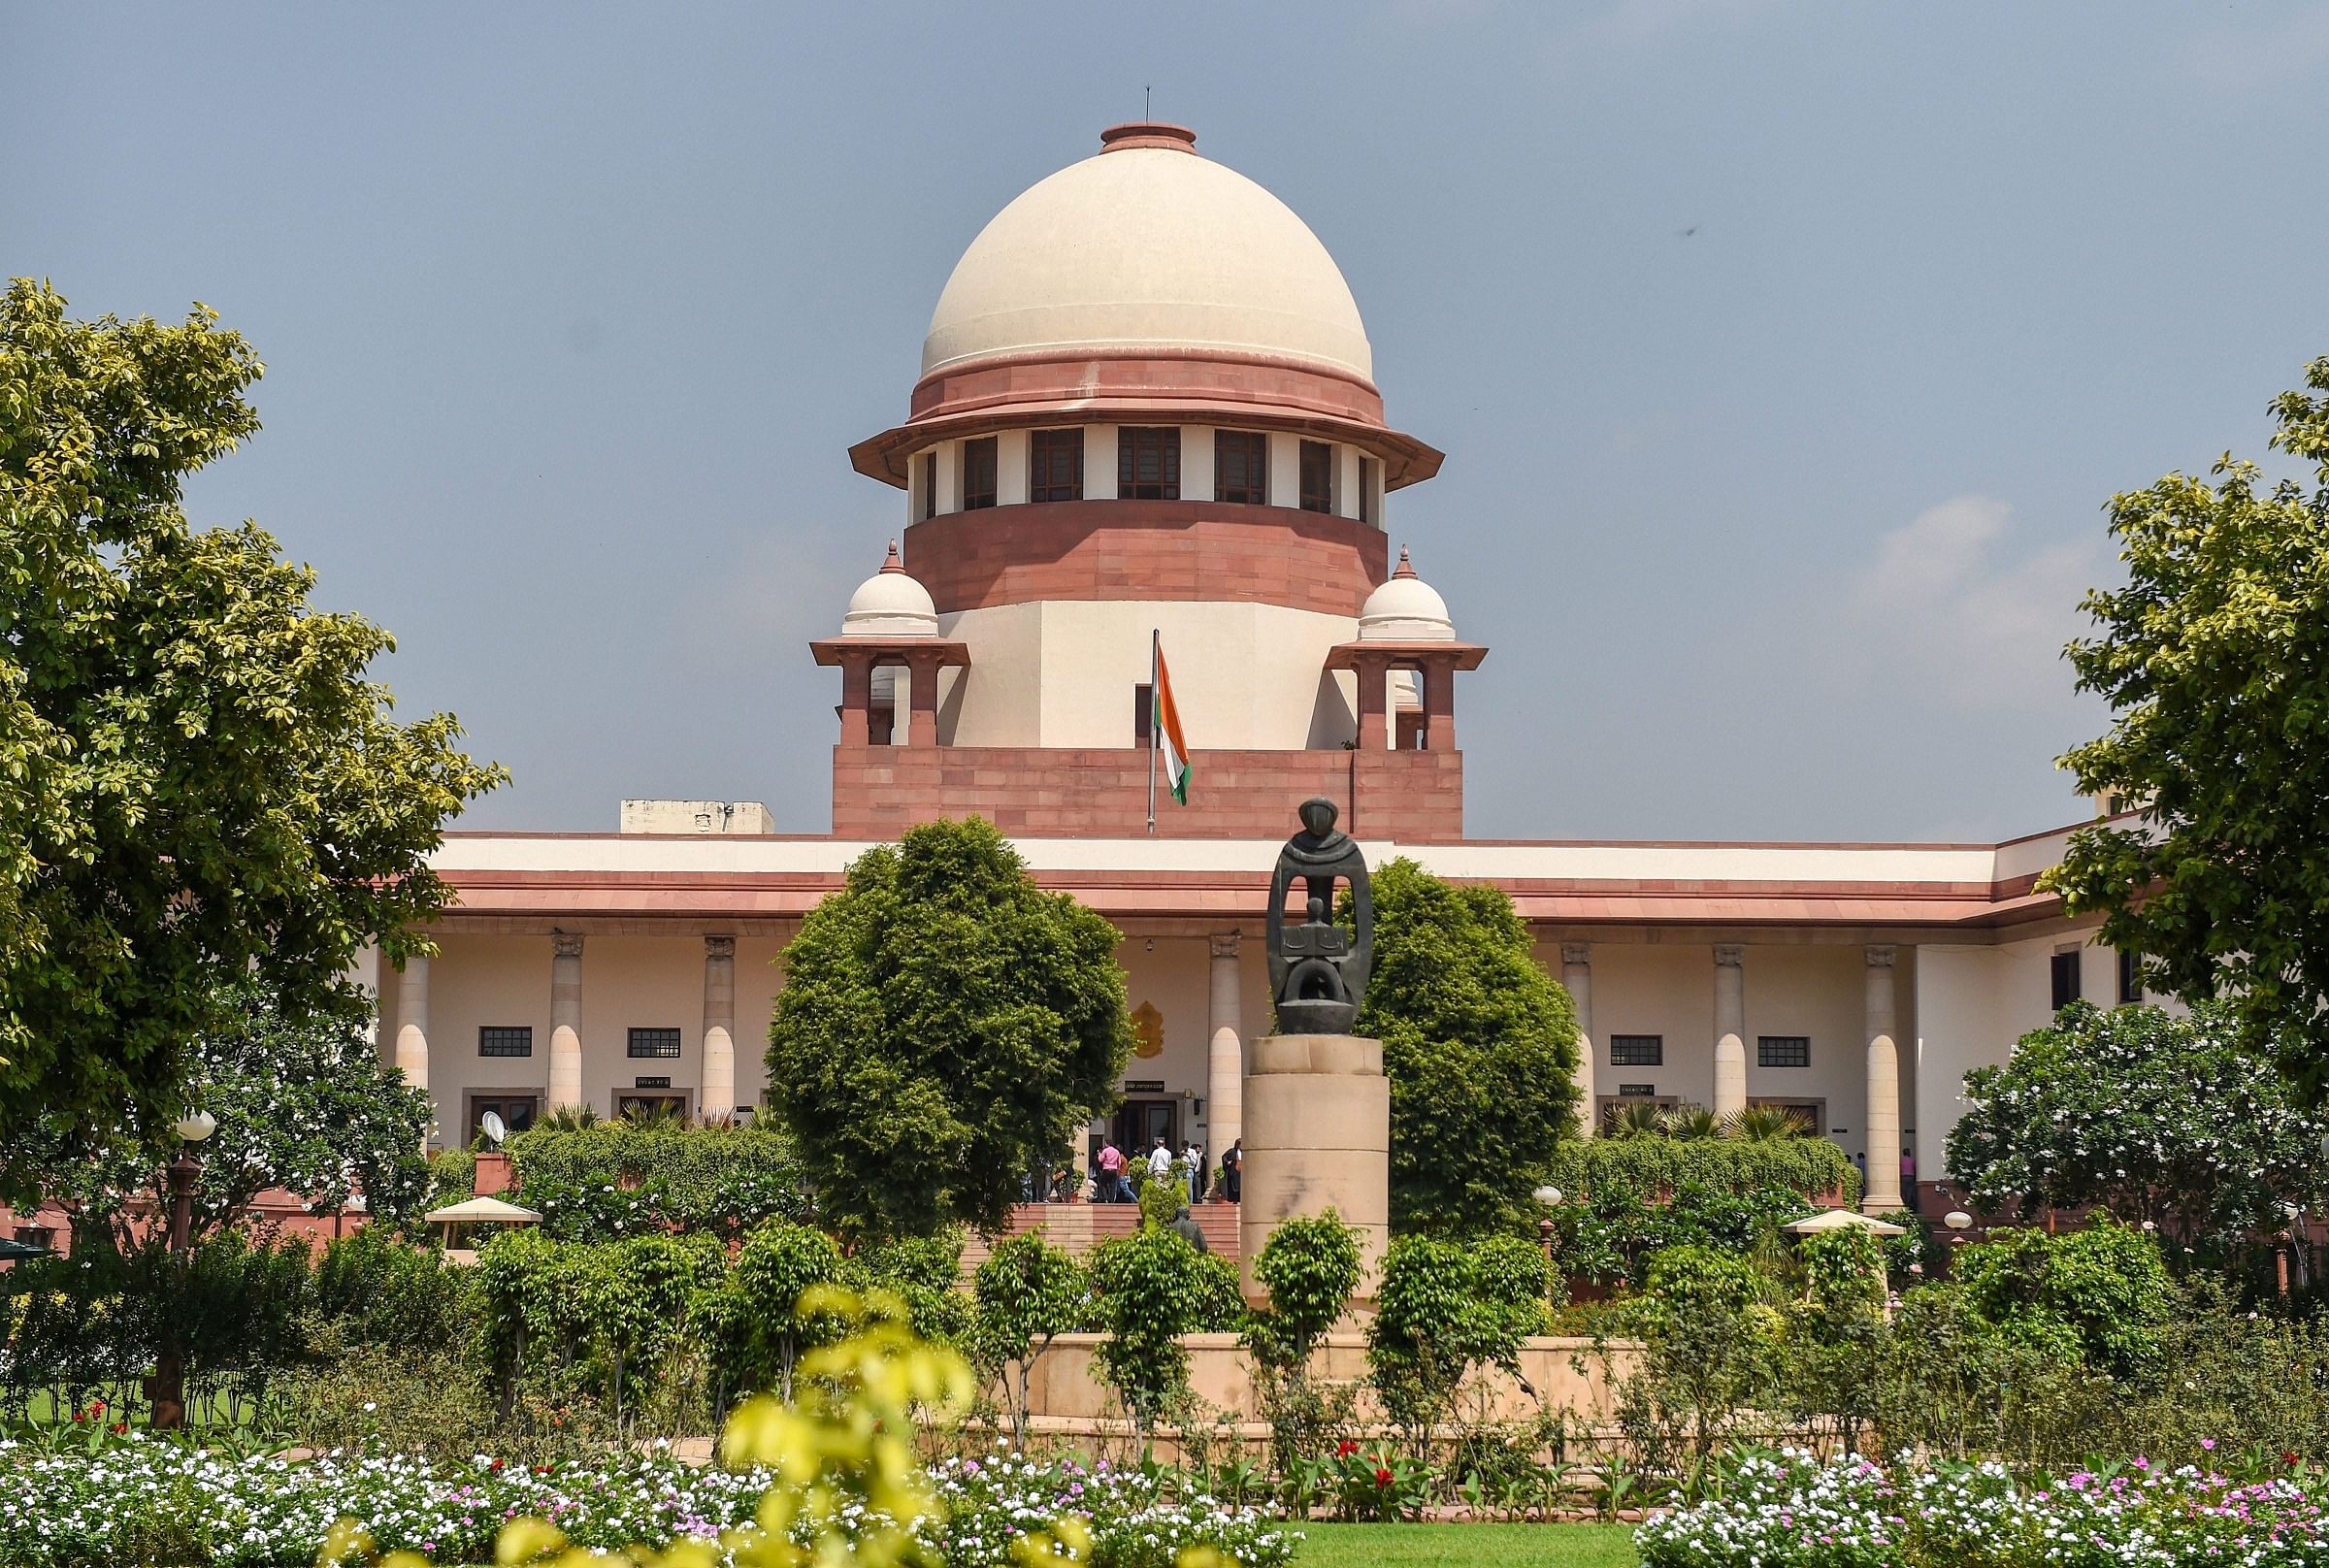 The apex court also directed the Uttar Pradesh government to provide Rs 25 lakh to the rape survivor as interim compensation. Photo/PTI